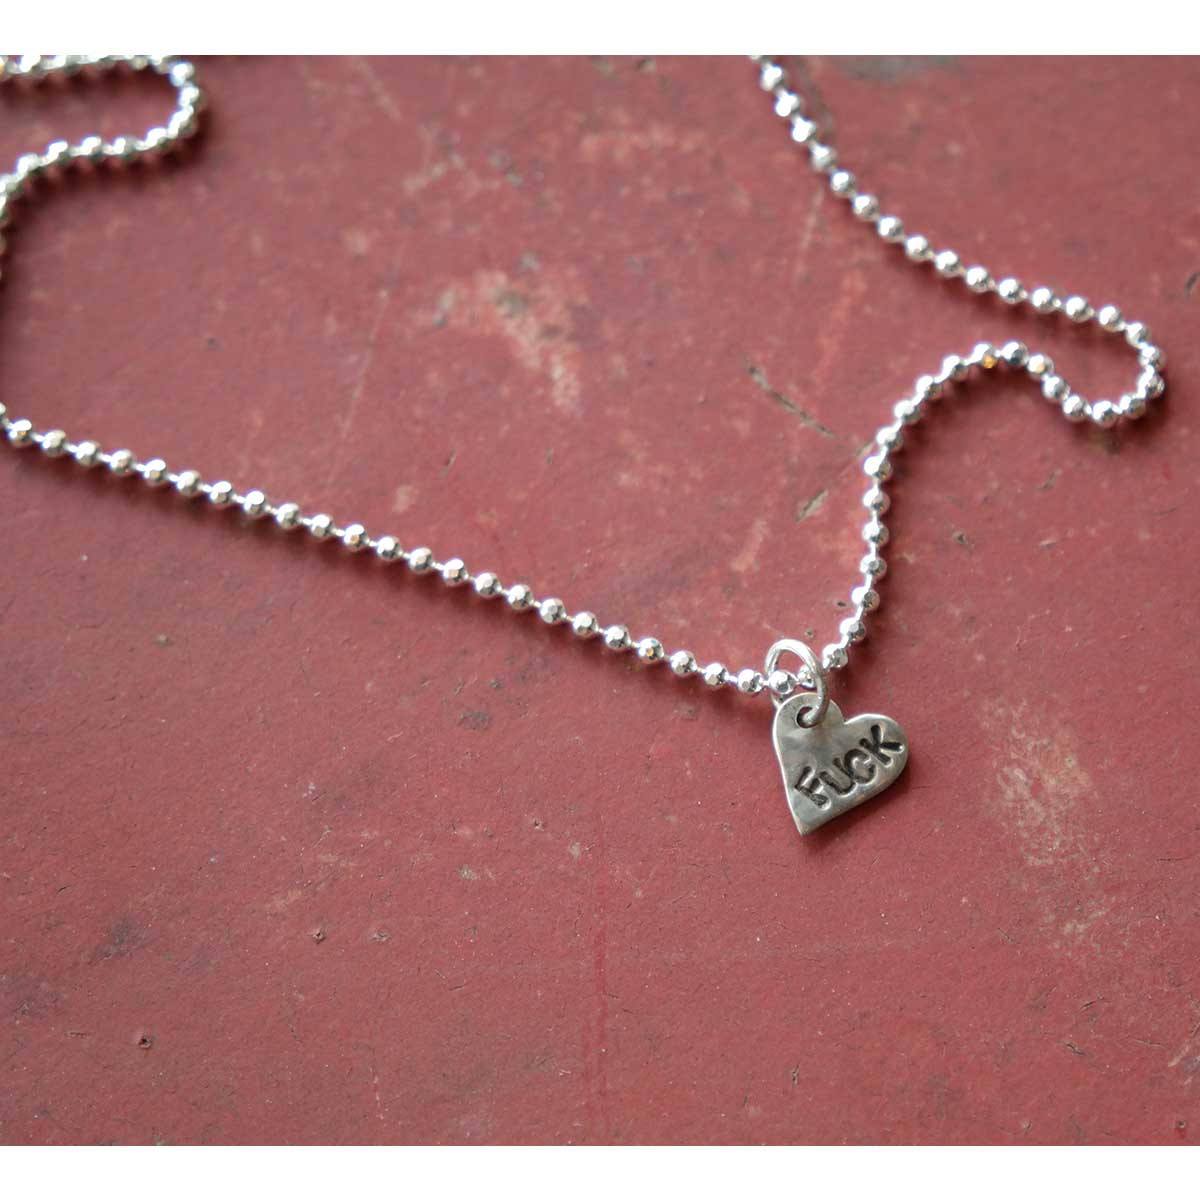 Fuck - Angry Heart Tiny Silver Necklace - 18" Chain Margaret Sullivan